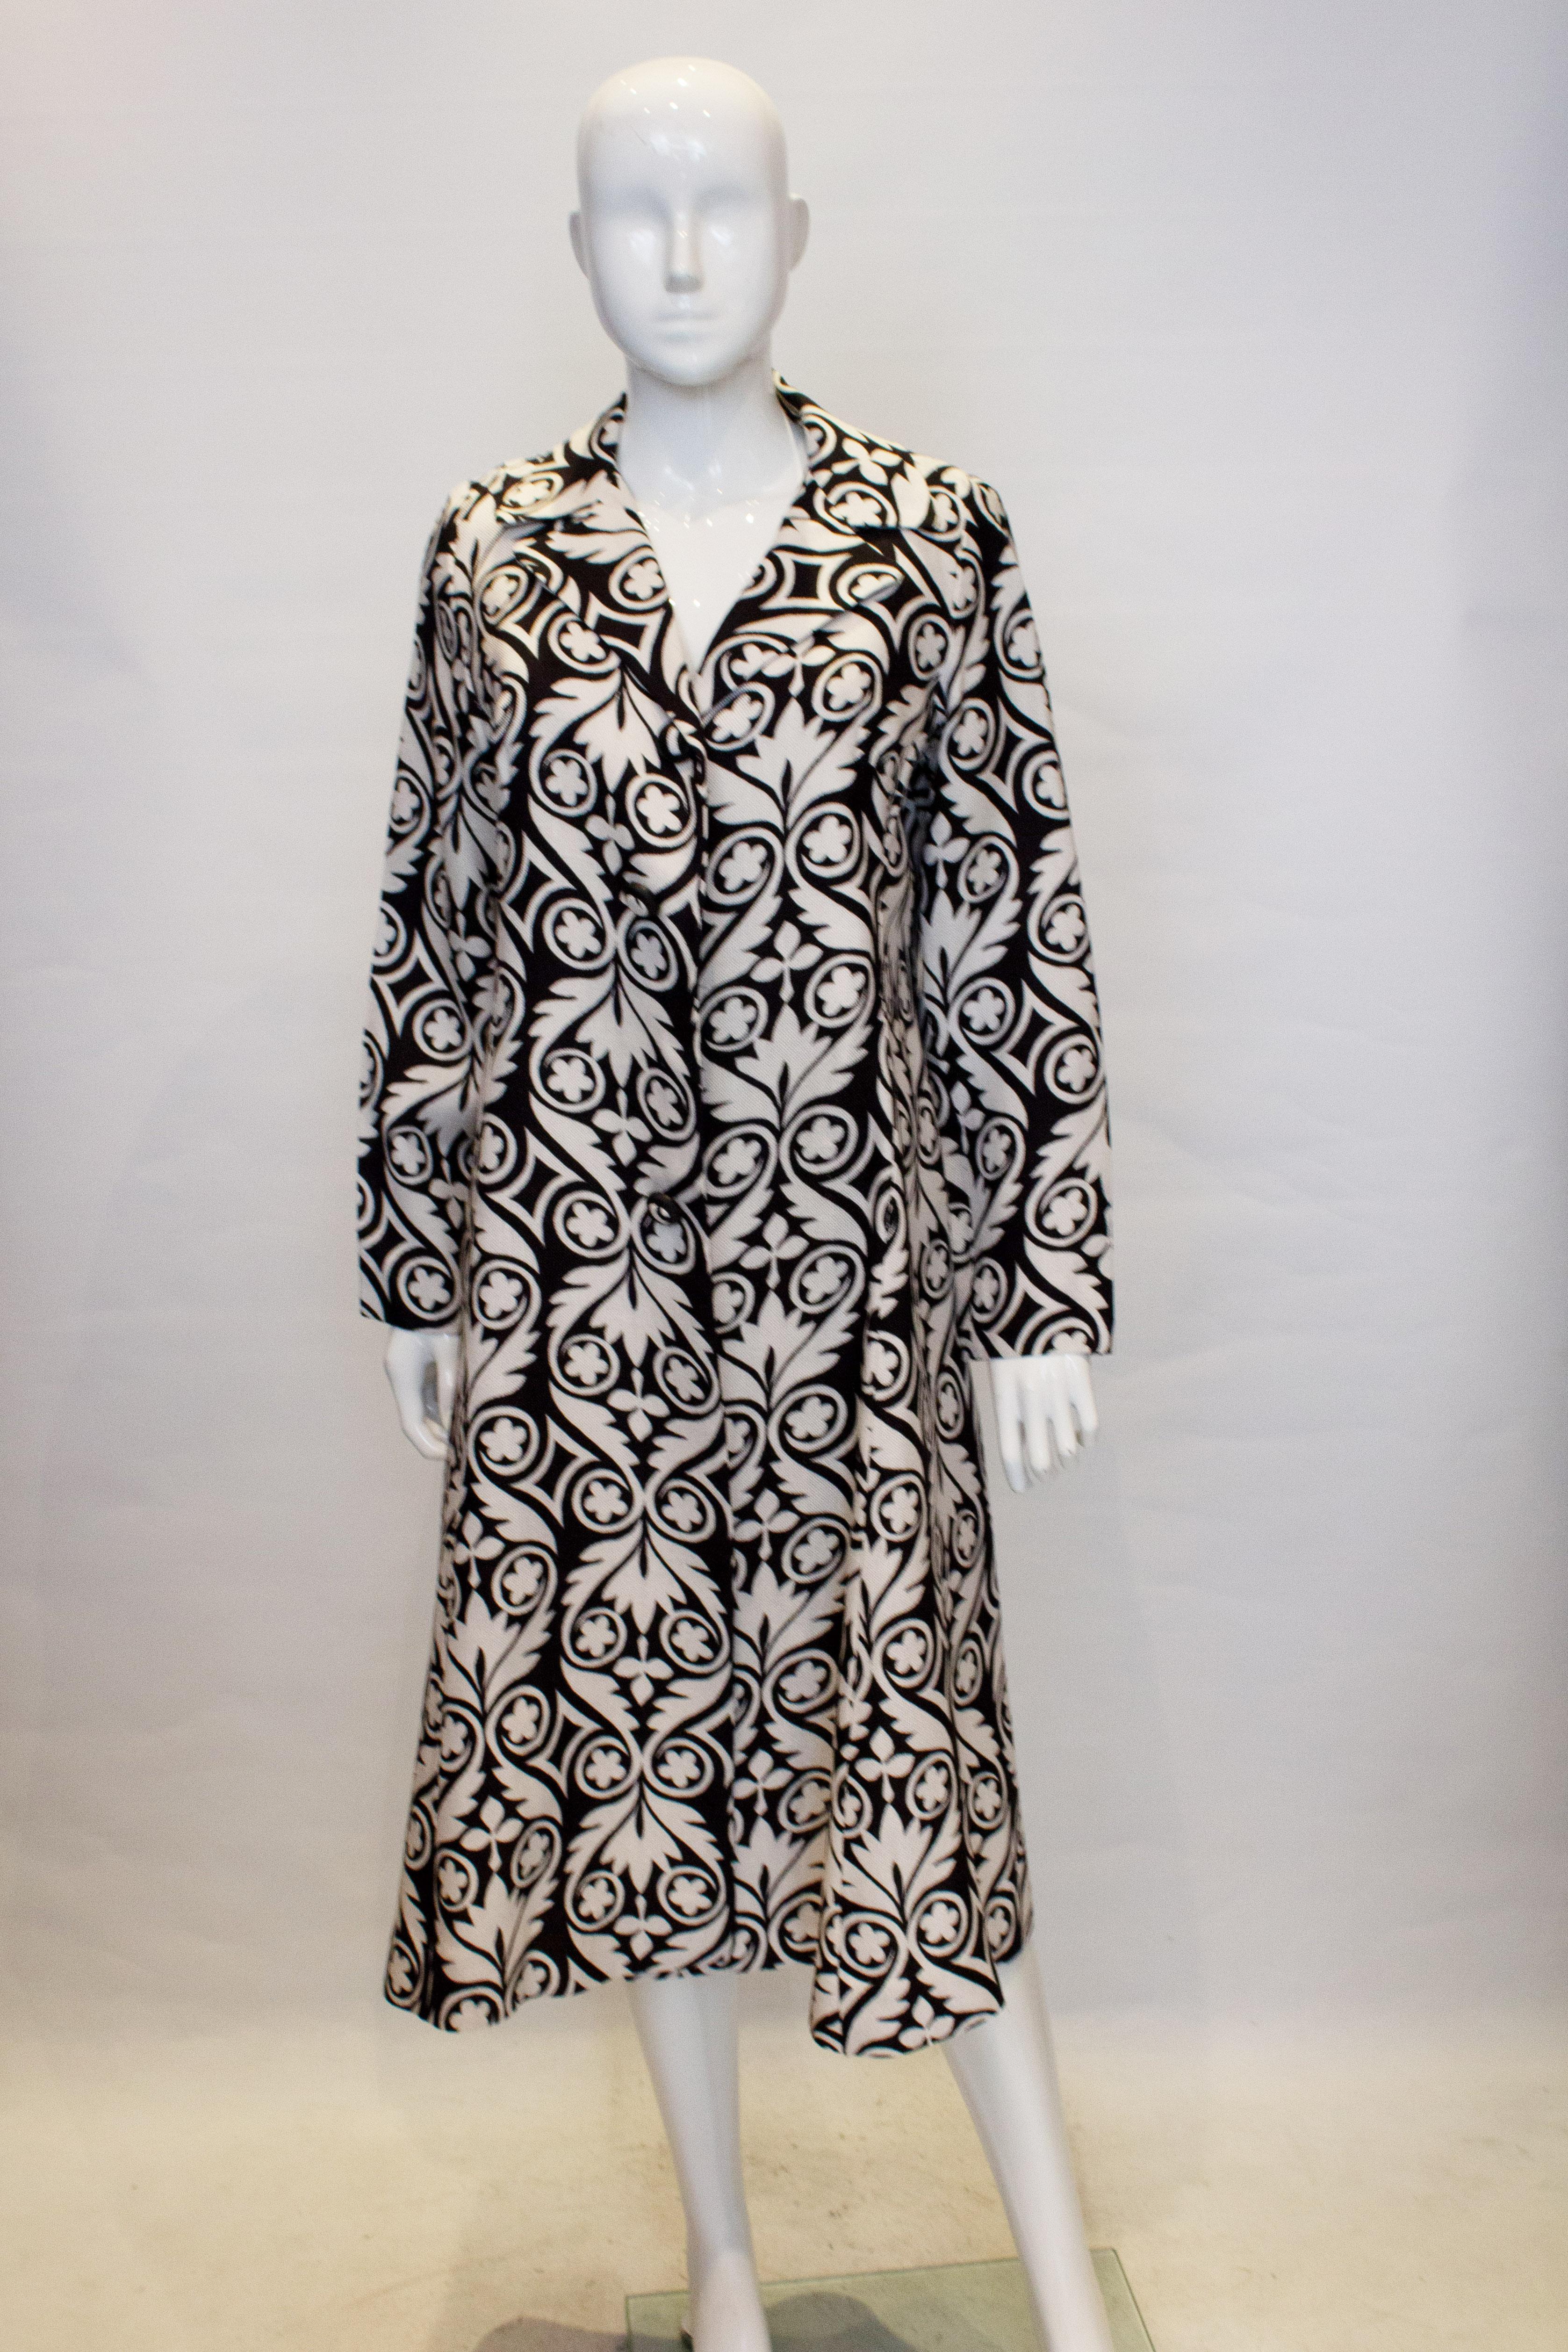 A stunning vintage duster coat  in a graphic black and white print. The coat is in a linen like fabric with a cut away collar. Marked a size 40.